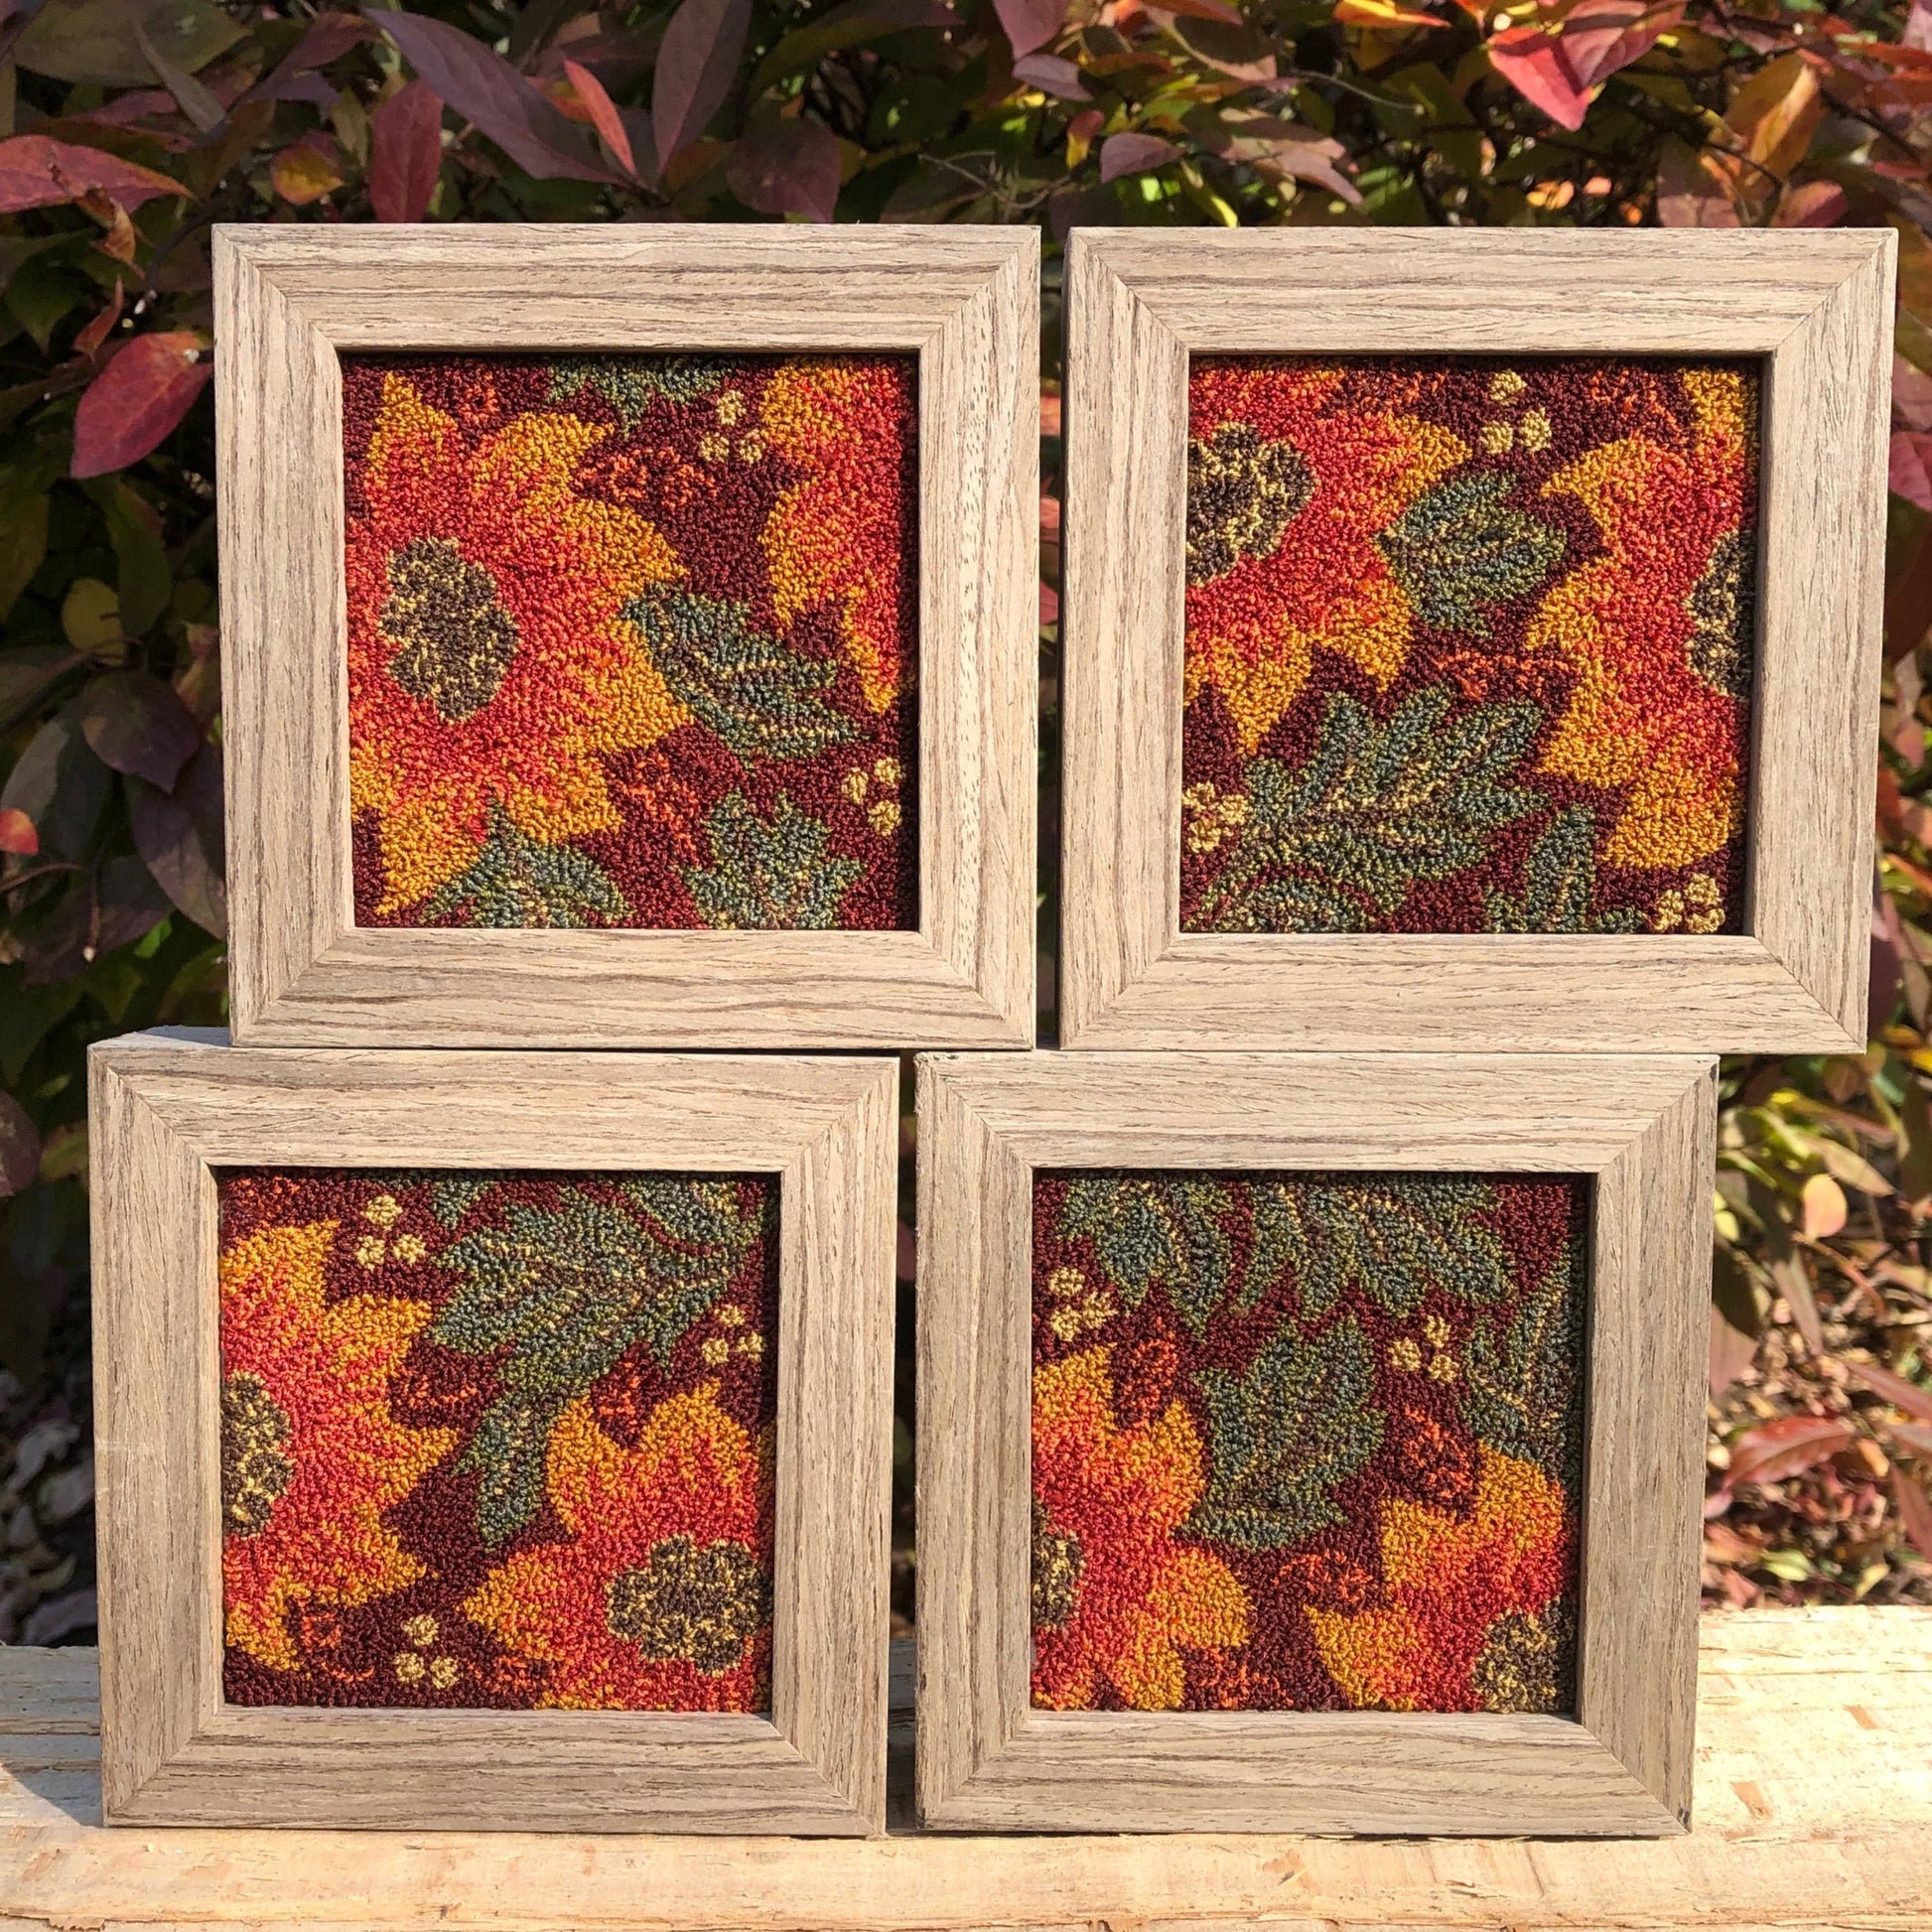 Autumn Glow- Punch Needle Pattern (set of 4) with DMC thread Kit by Orphaned Wool. This is a lovely set of 4 punch needle pattern designed to fit into a 4 x 4 frames. Copyright 2021 Kelly Kanyok- All Rights Reserved.